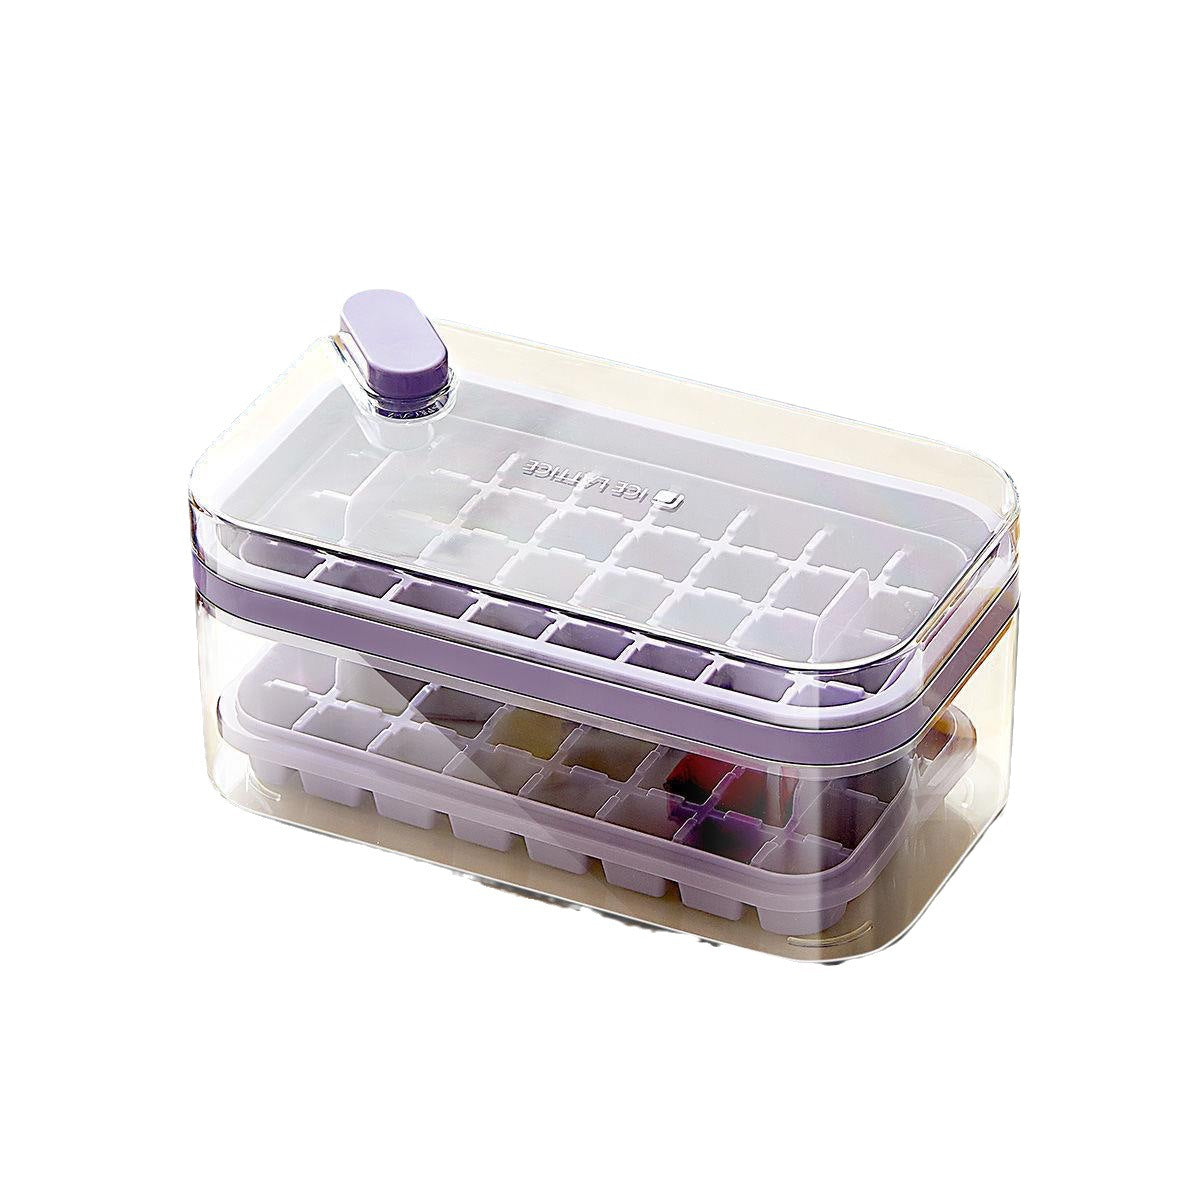 Ice Cube Tray Set Including Lid and Bin, 64 Pieces Ice Cube Molds, Freezer Ice Trays, Mold for Ice Cubes with 2 Trays, Container for Freezing Ice, Lid and Scoop for Spill Prevention, Ideal for Various Beverages.